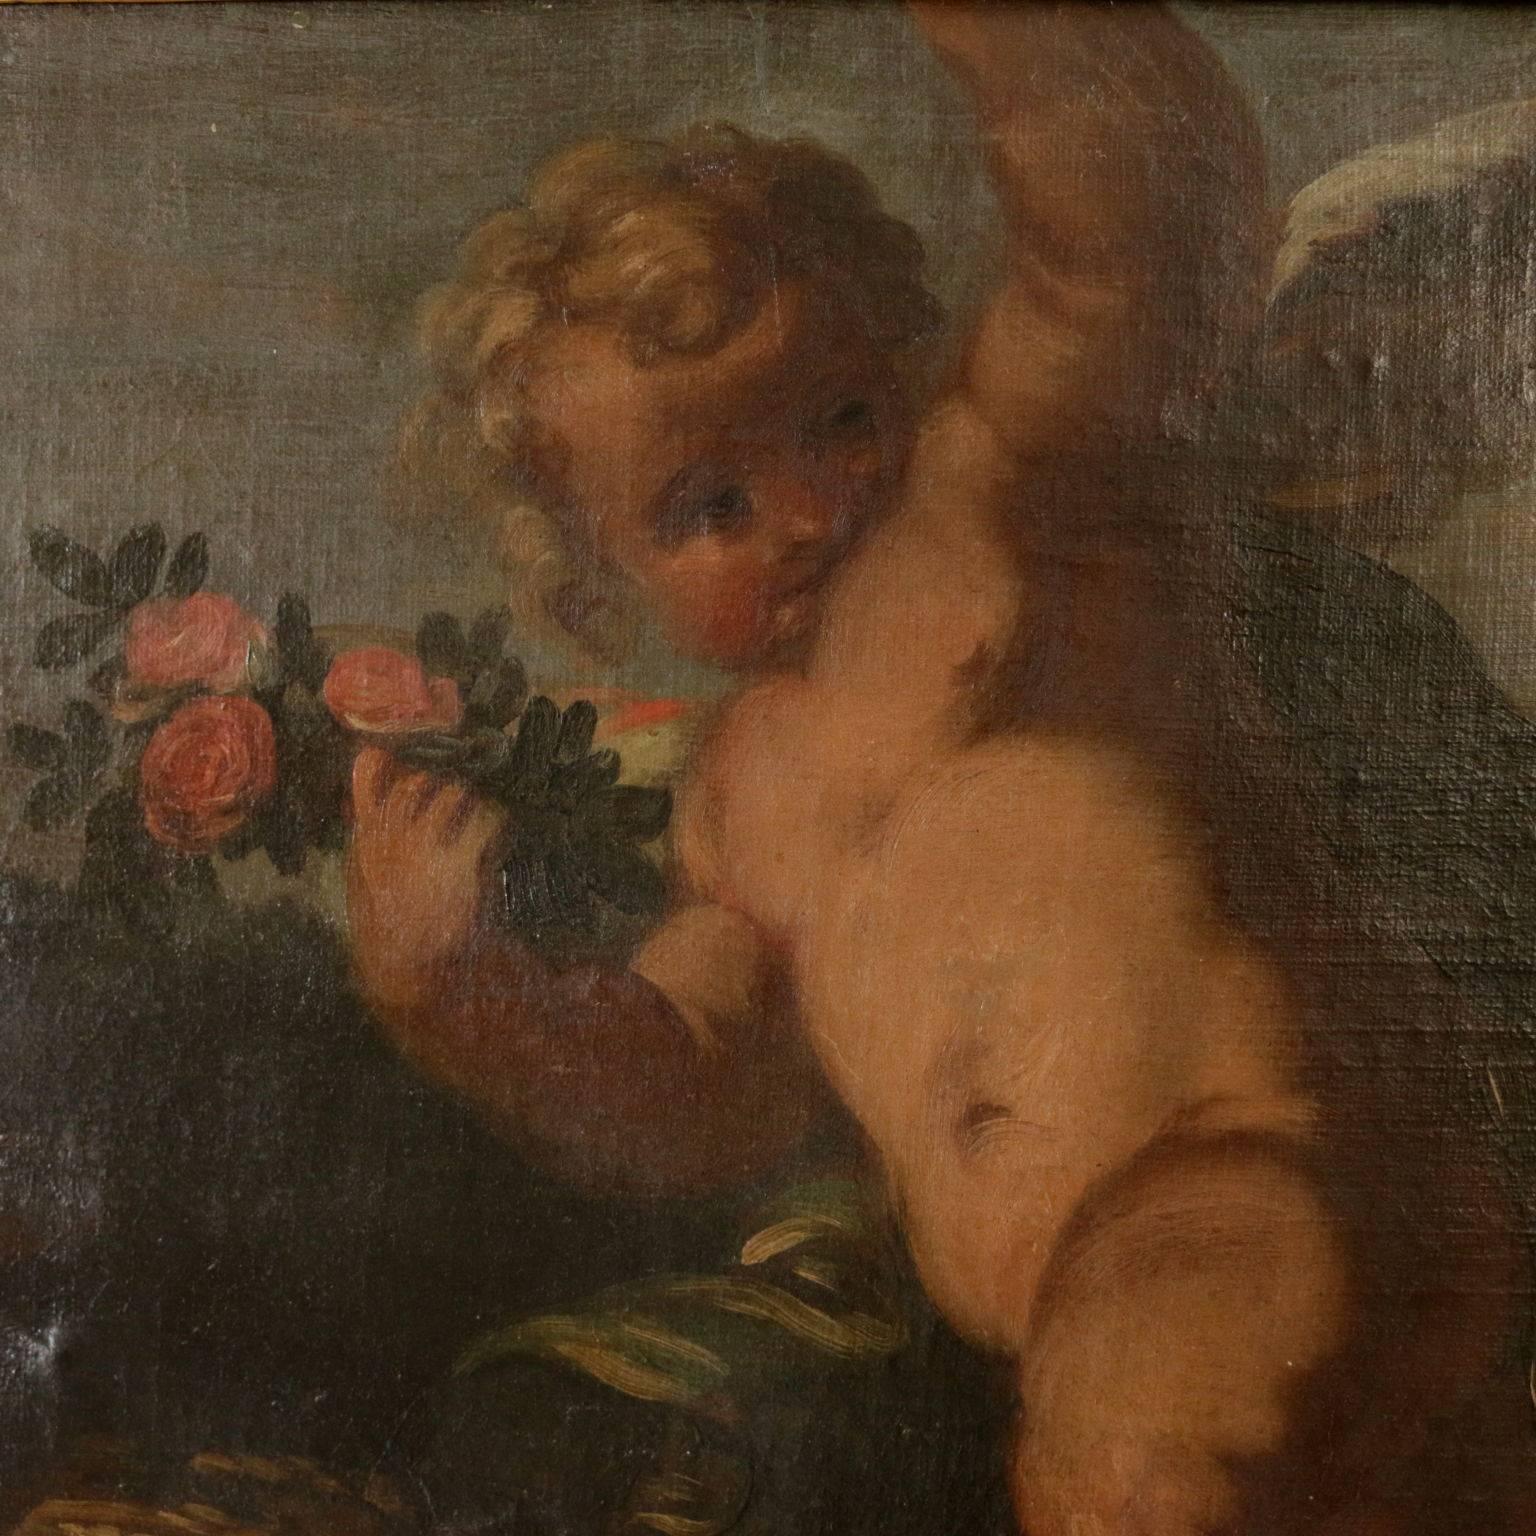 Allegory with Cherubs Oil on Canvas 18th Century - Brown Interior Painting by Unknown